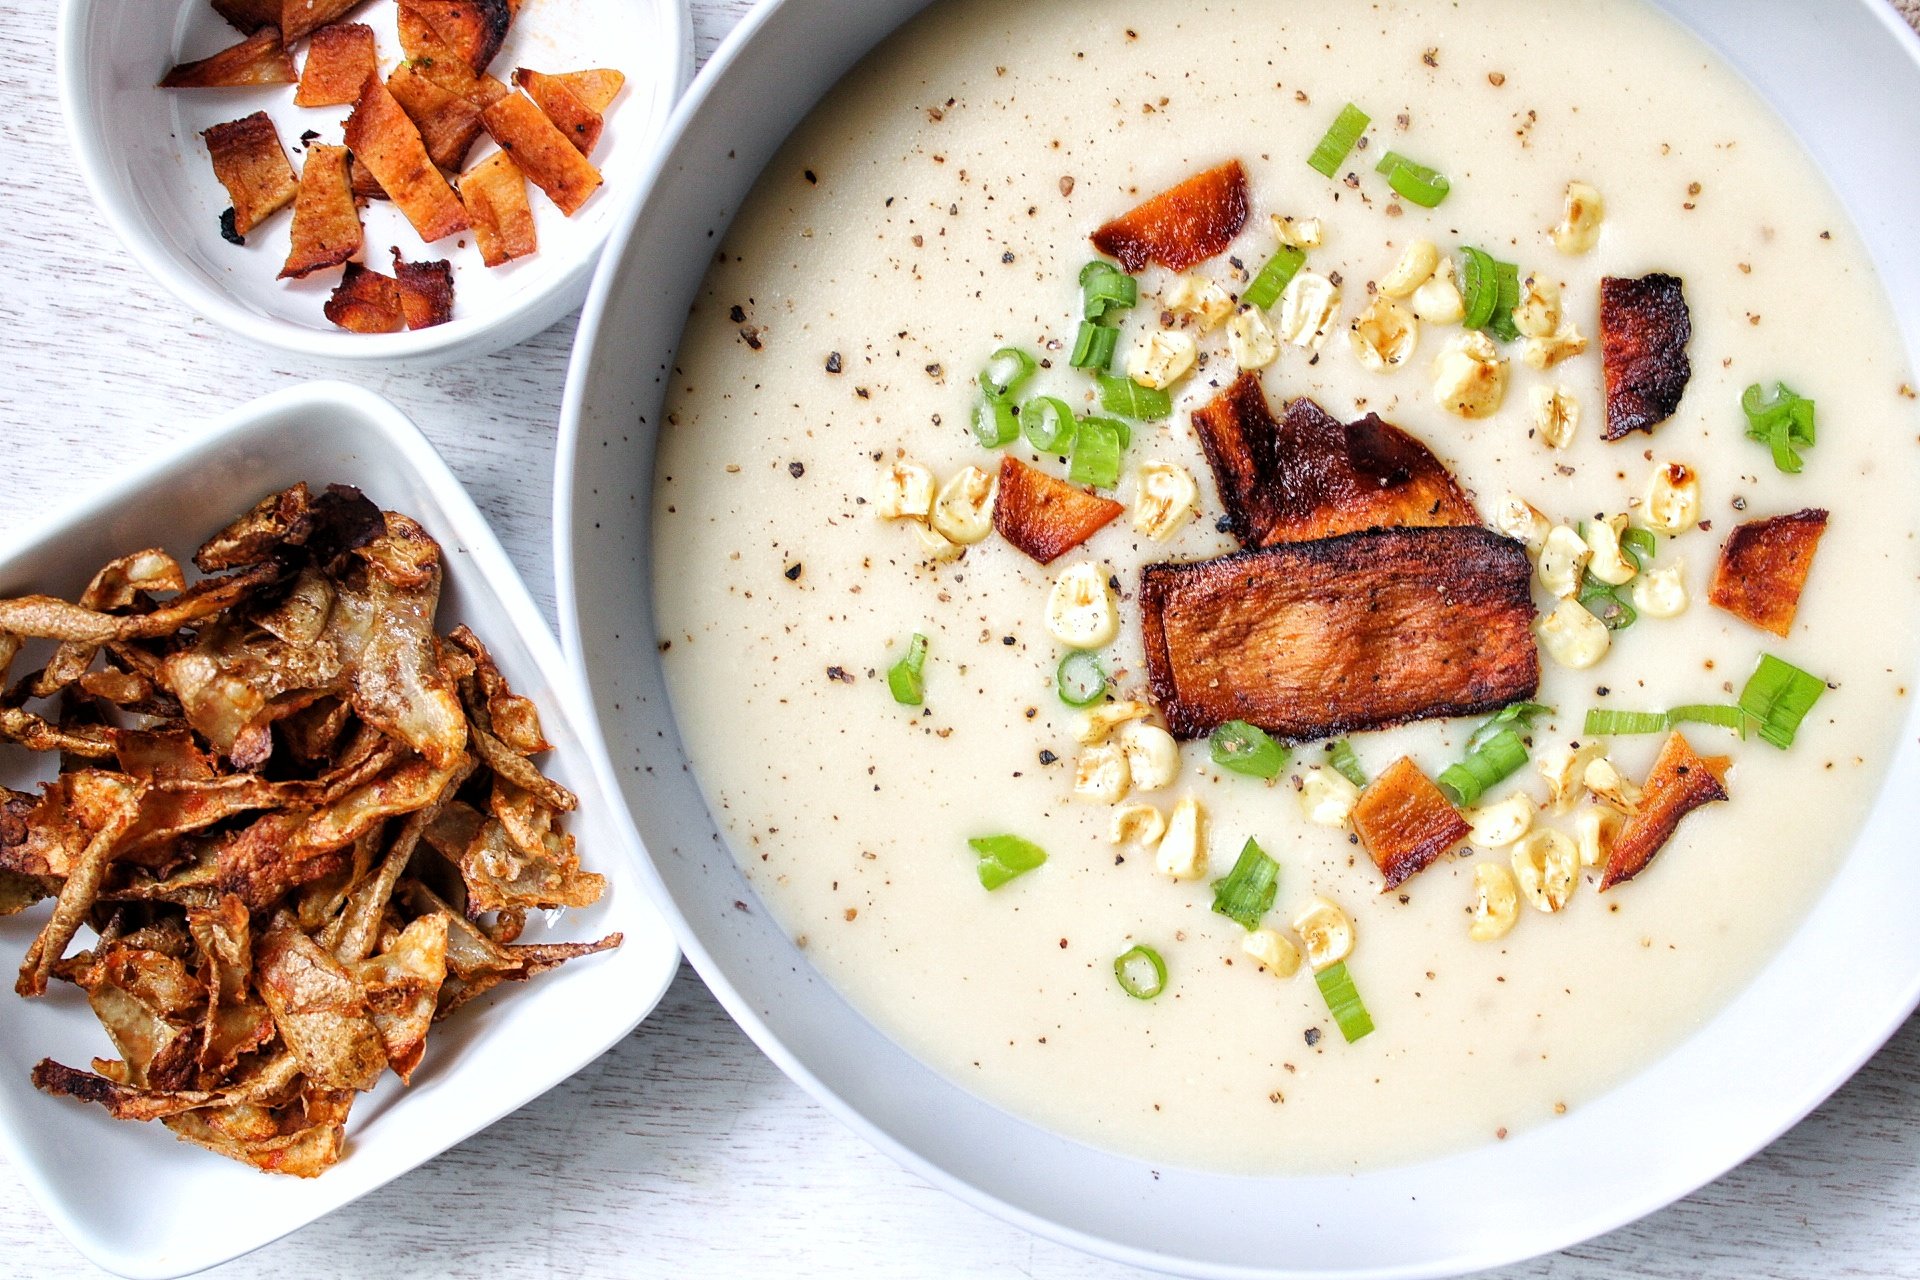 Plant-based creamy, garlic potato soup topped with vegan bacon, green onions, and corn. With a side of roasted potato peels. 